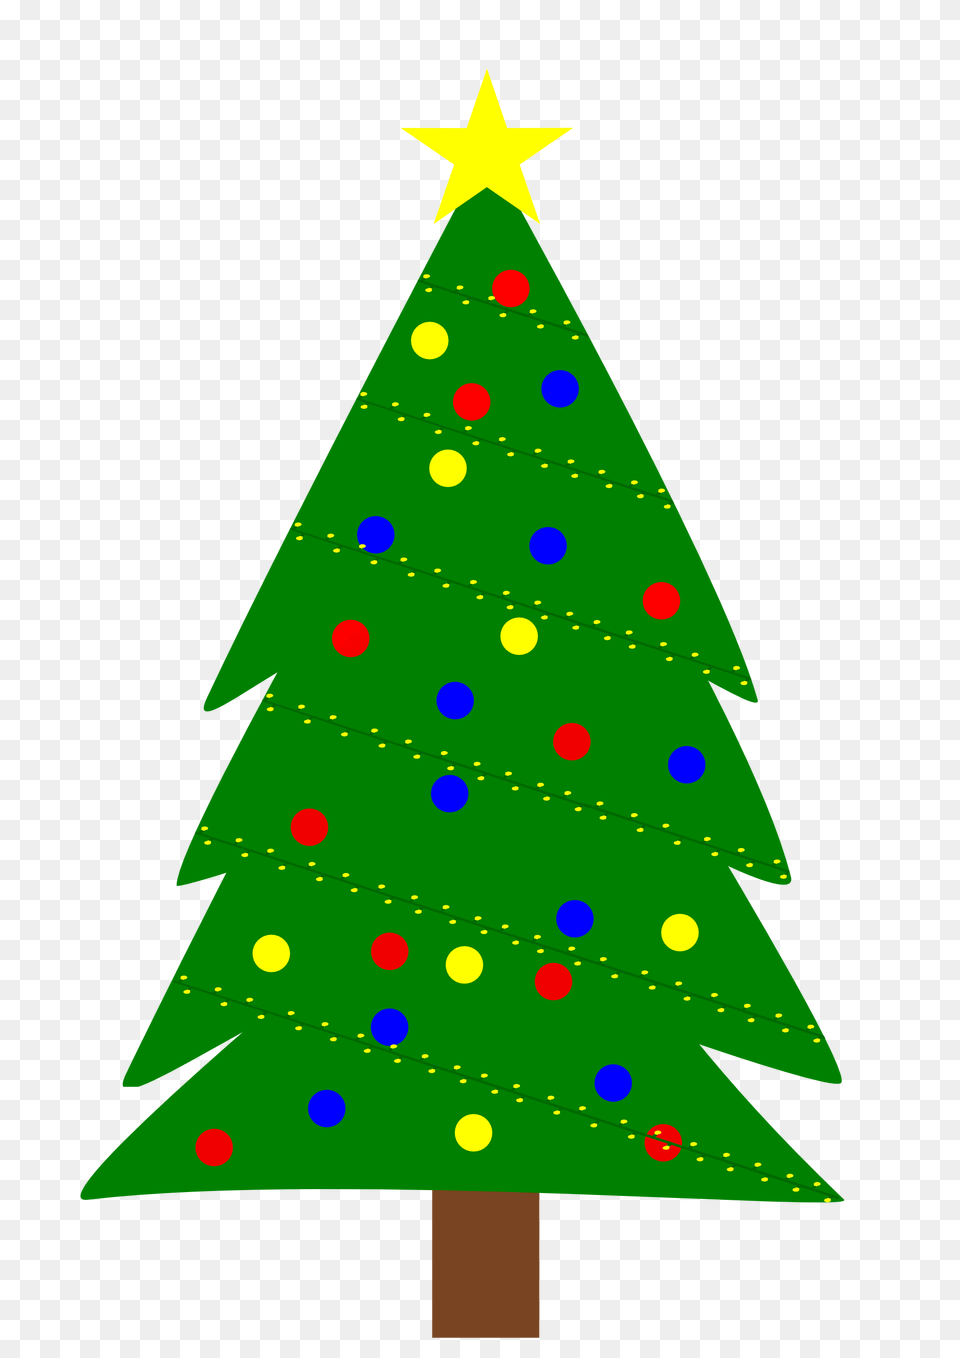 Evergreen Tree Outline, Christmas, Christmas Decorations, Festival, Christmas Tree Free Png